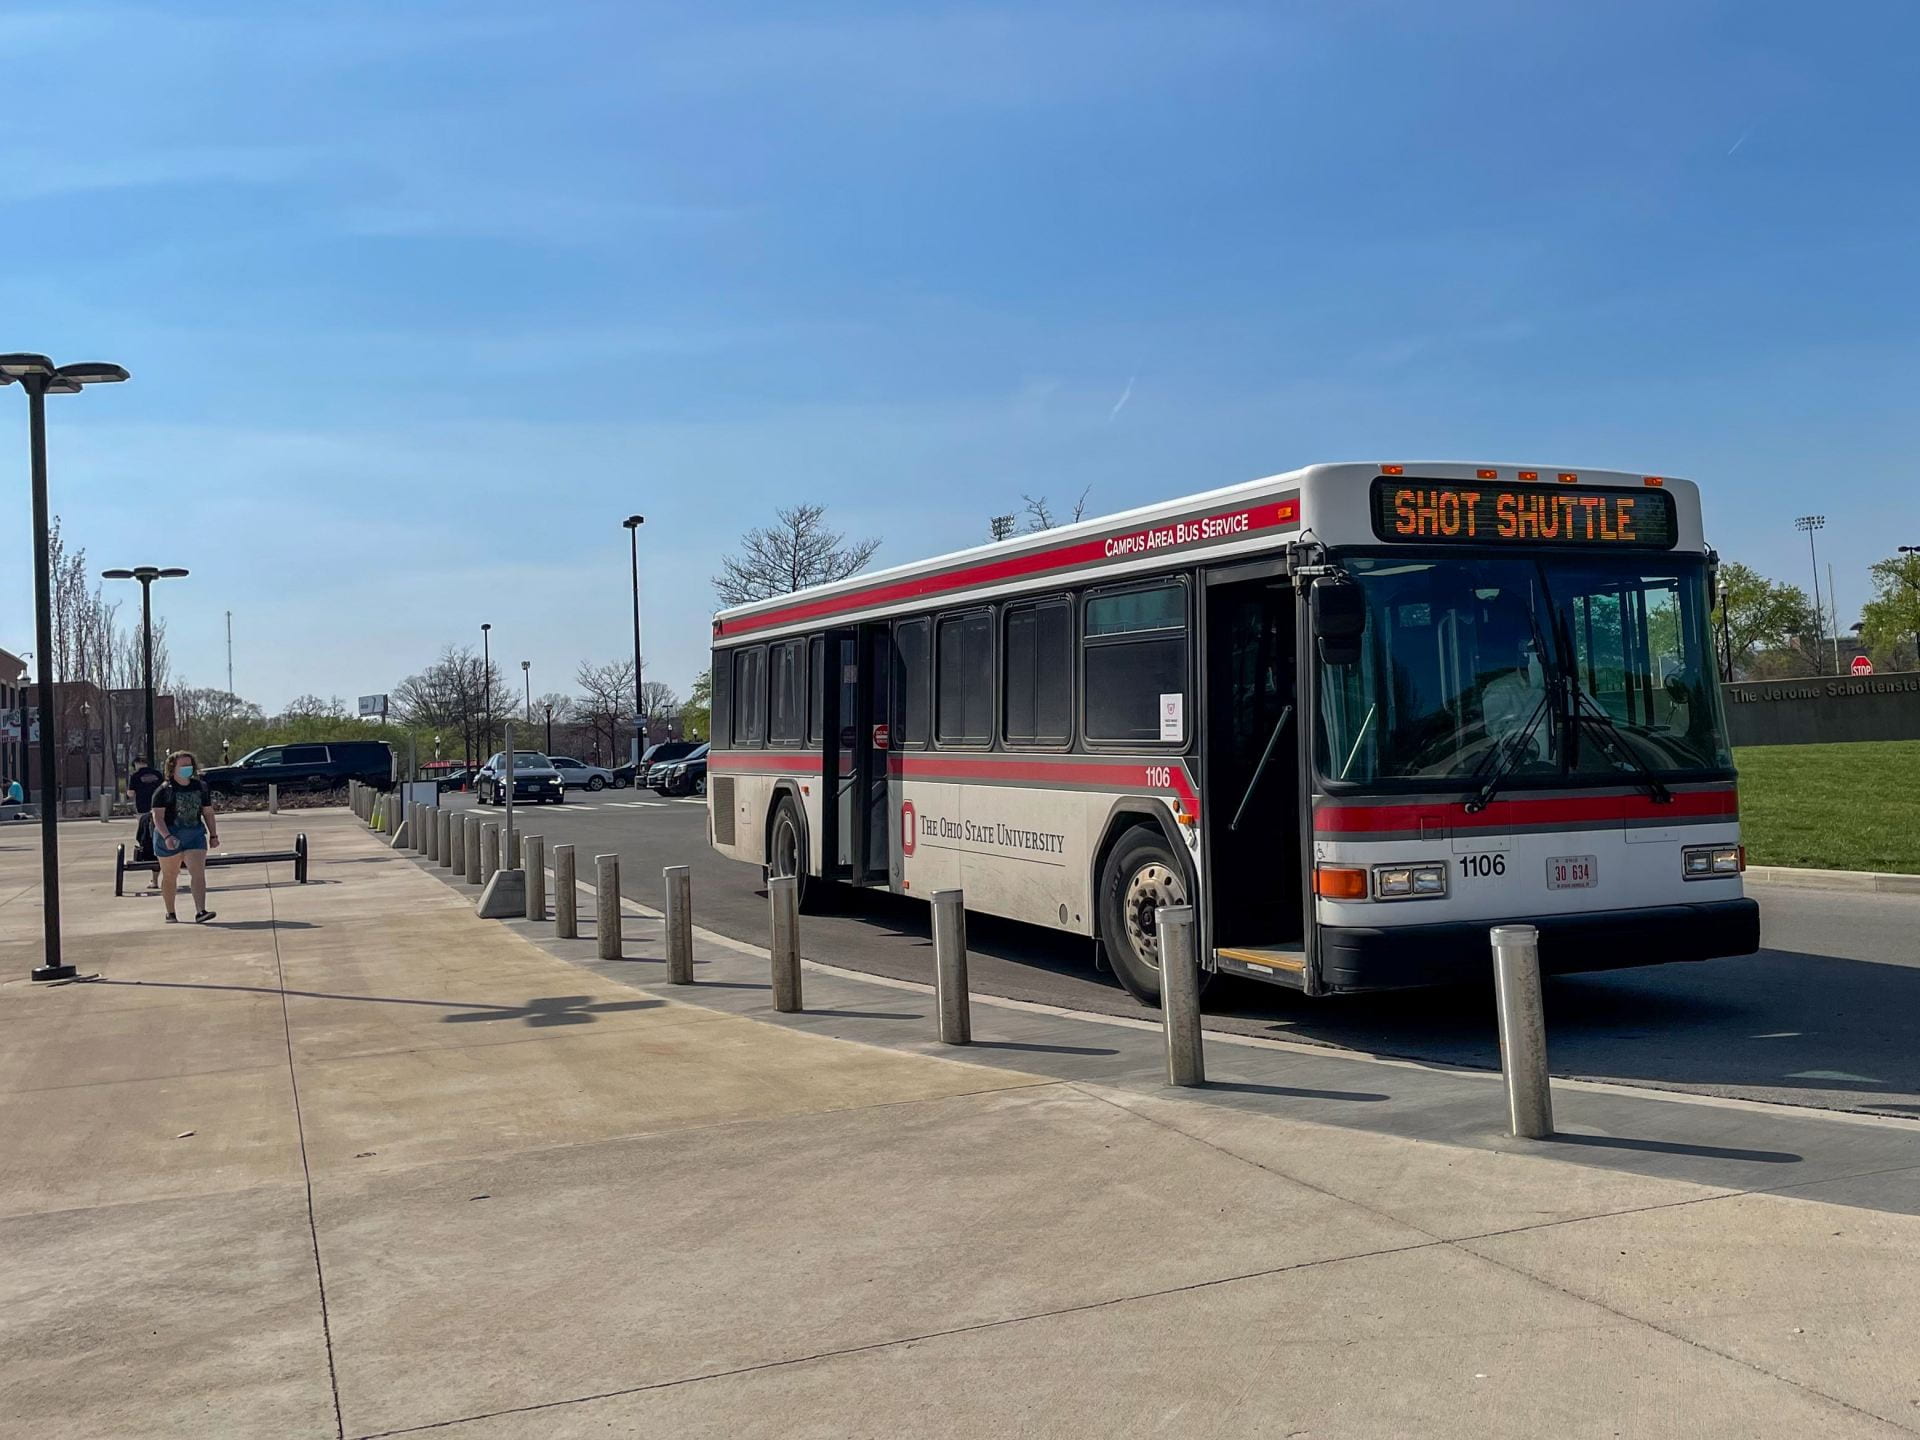 Campus Area Bus Service's new Shot Shuttle will transport students, faculty and staff from campus to the Schottenstein